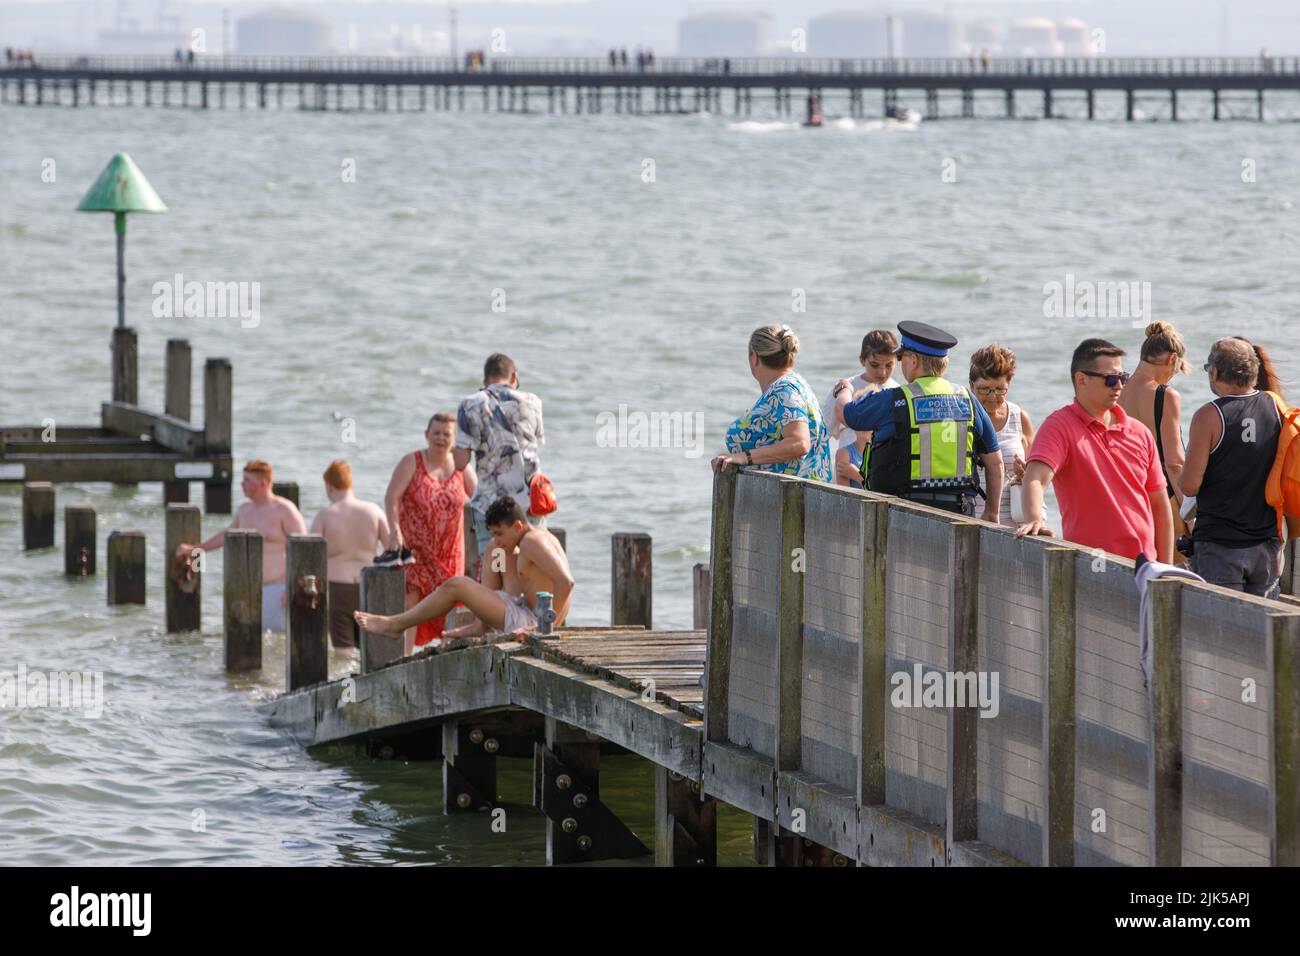 A Police community support officer tells people to get off a submerged pier on Southend beach during the UK heatwave of 2022 Stock Photo